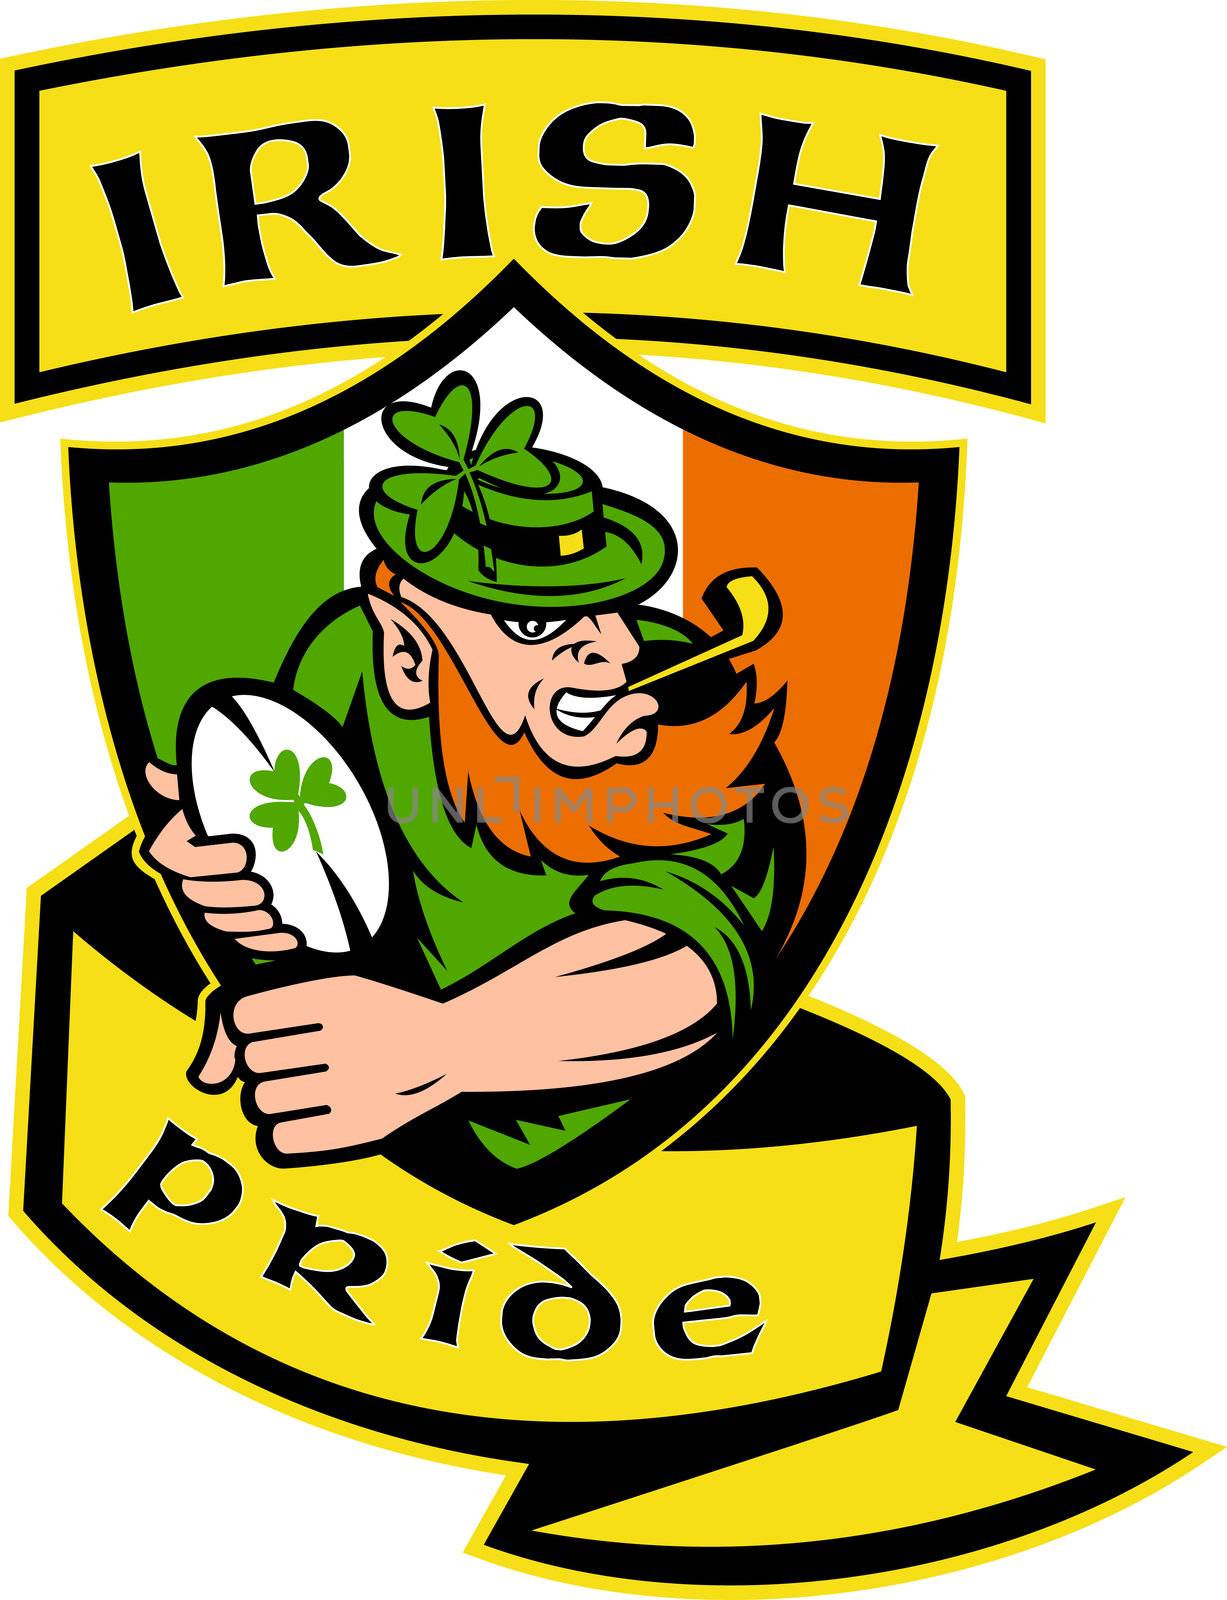 illustration of an Irish leprechaun or rugby player running with ball wearing hat with shamrock or clover leaf  and shield flag of Ireland and words "Irish Pride"